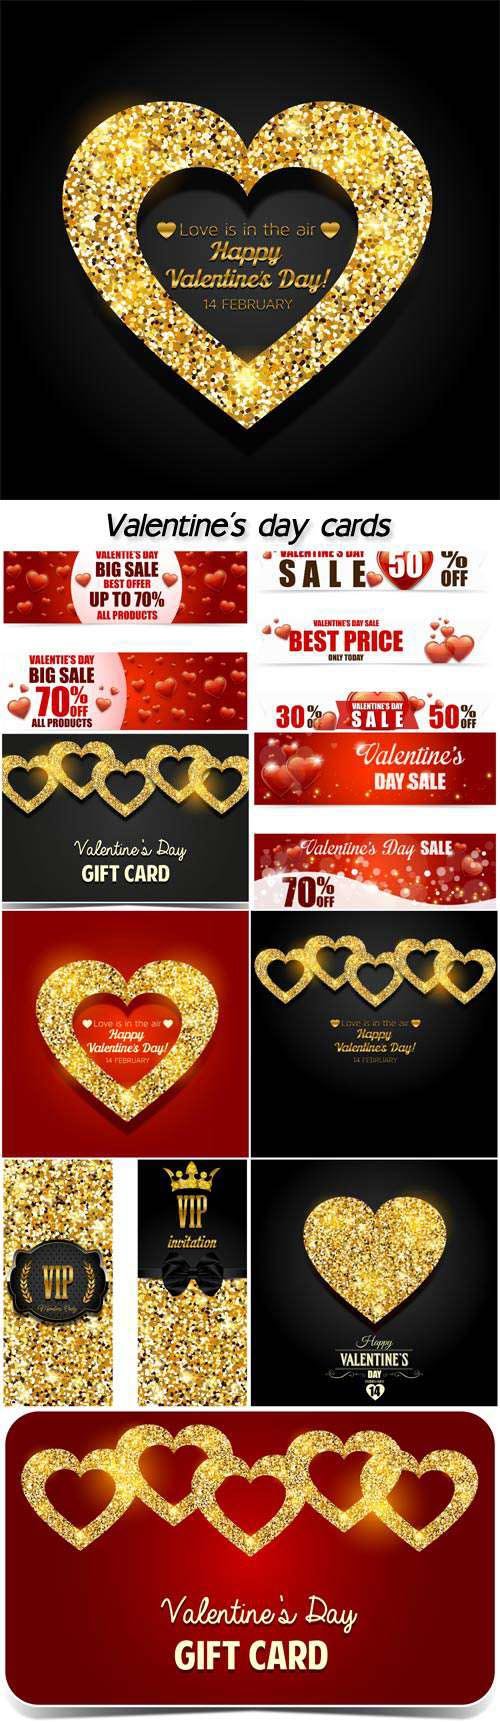 Valentine's day background with hearts, sale